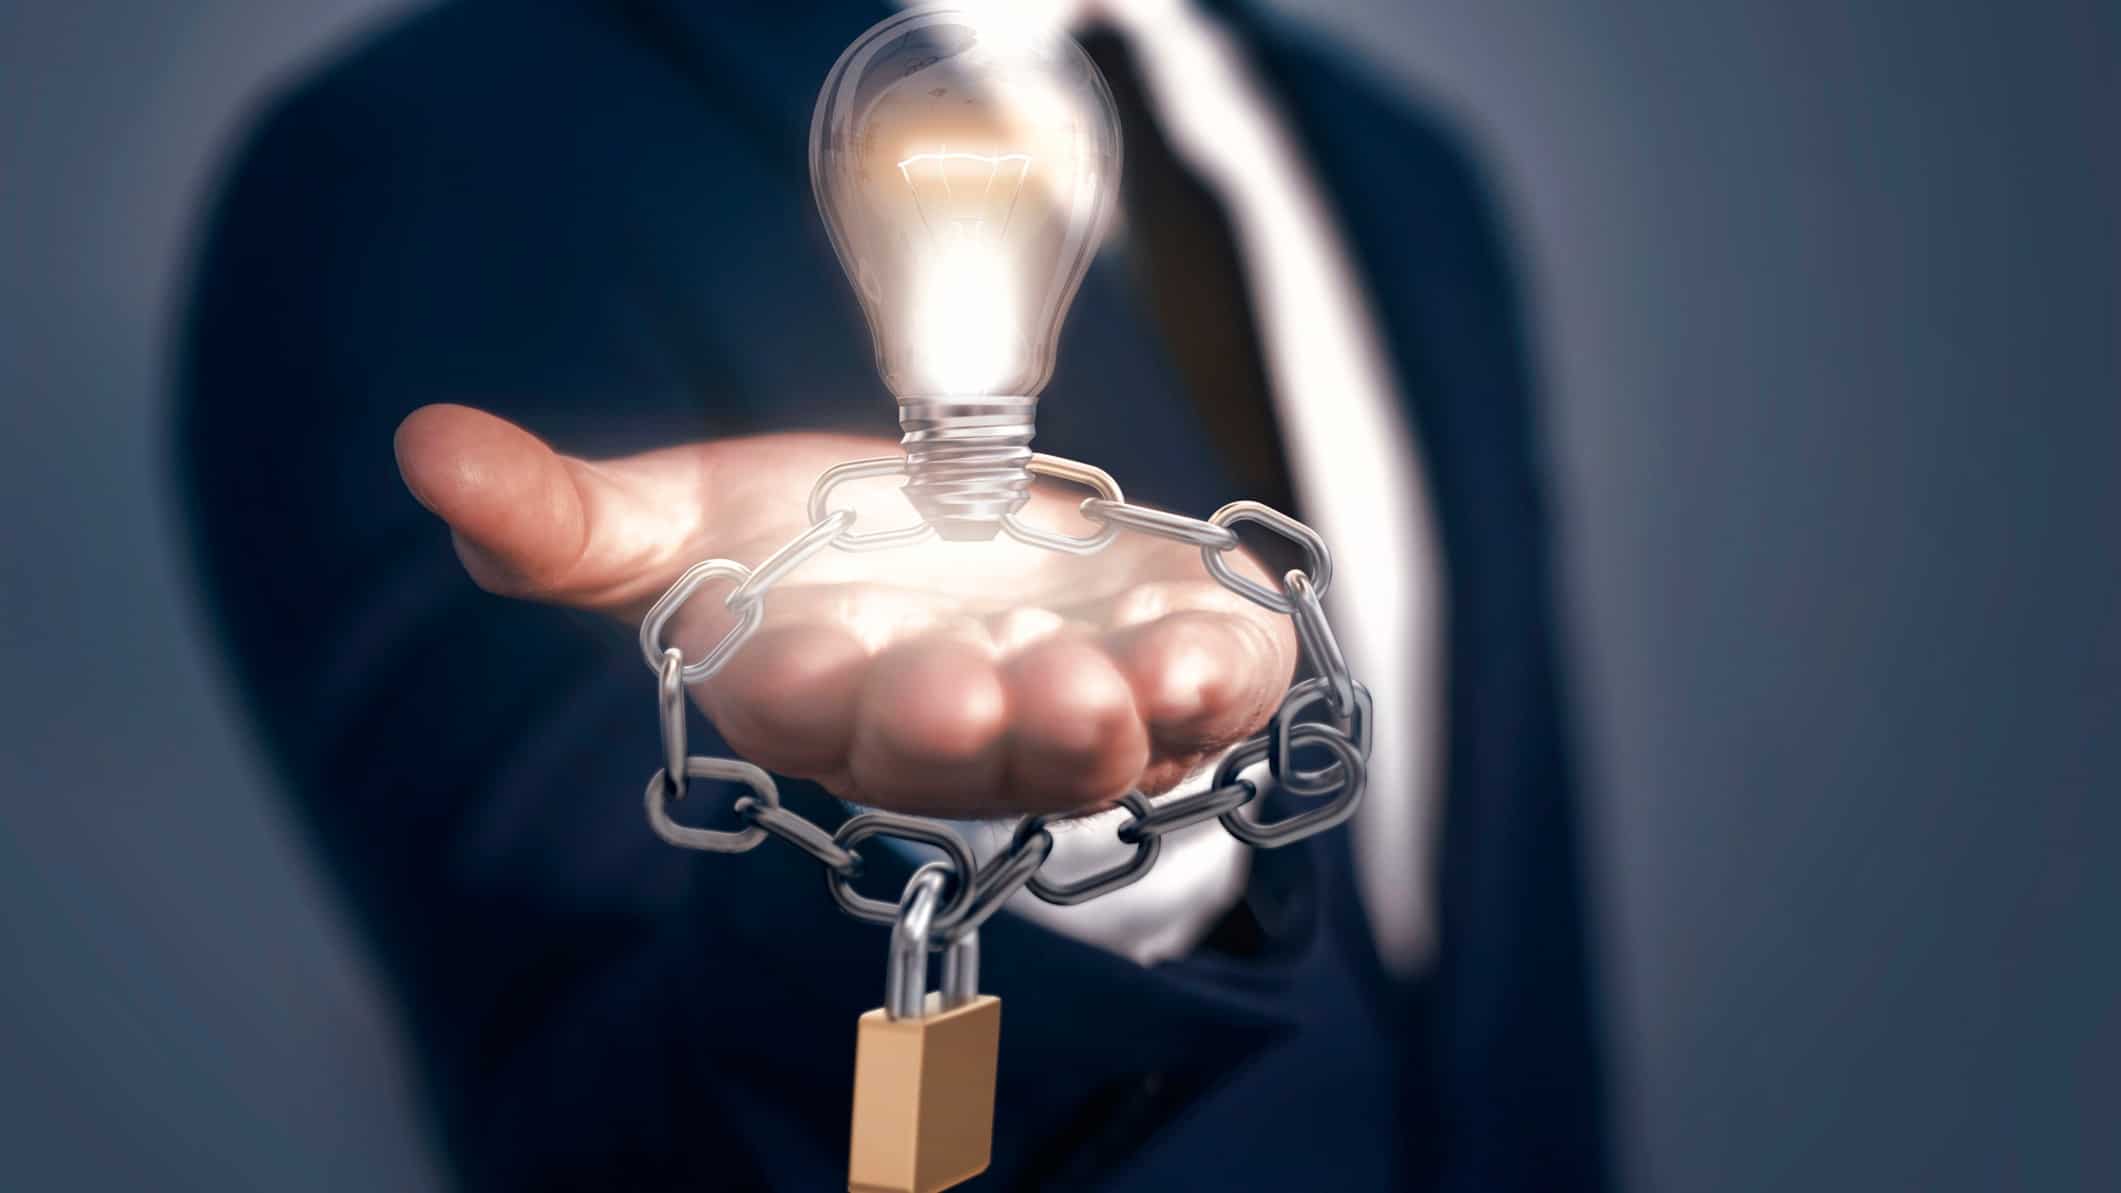 man holding a light bulb with a chain and padlock around it